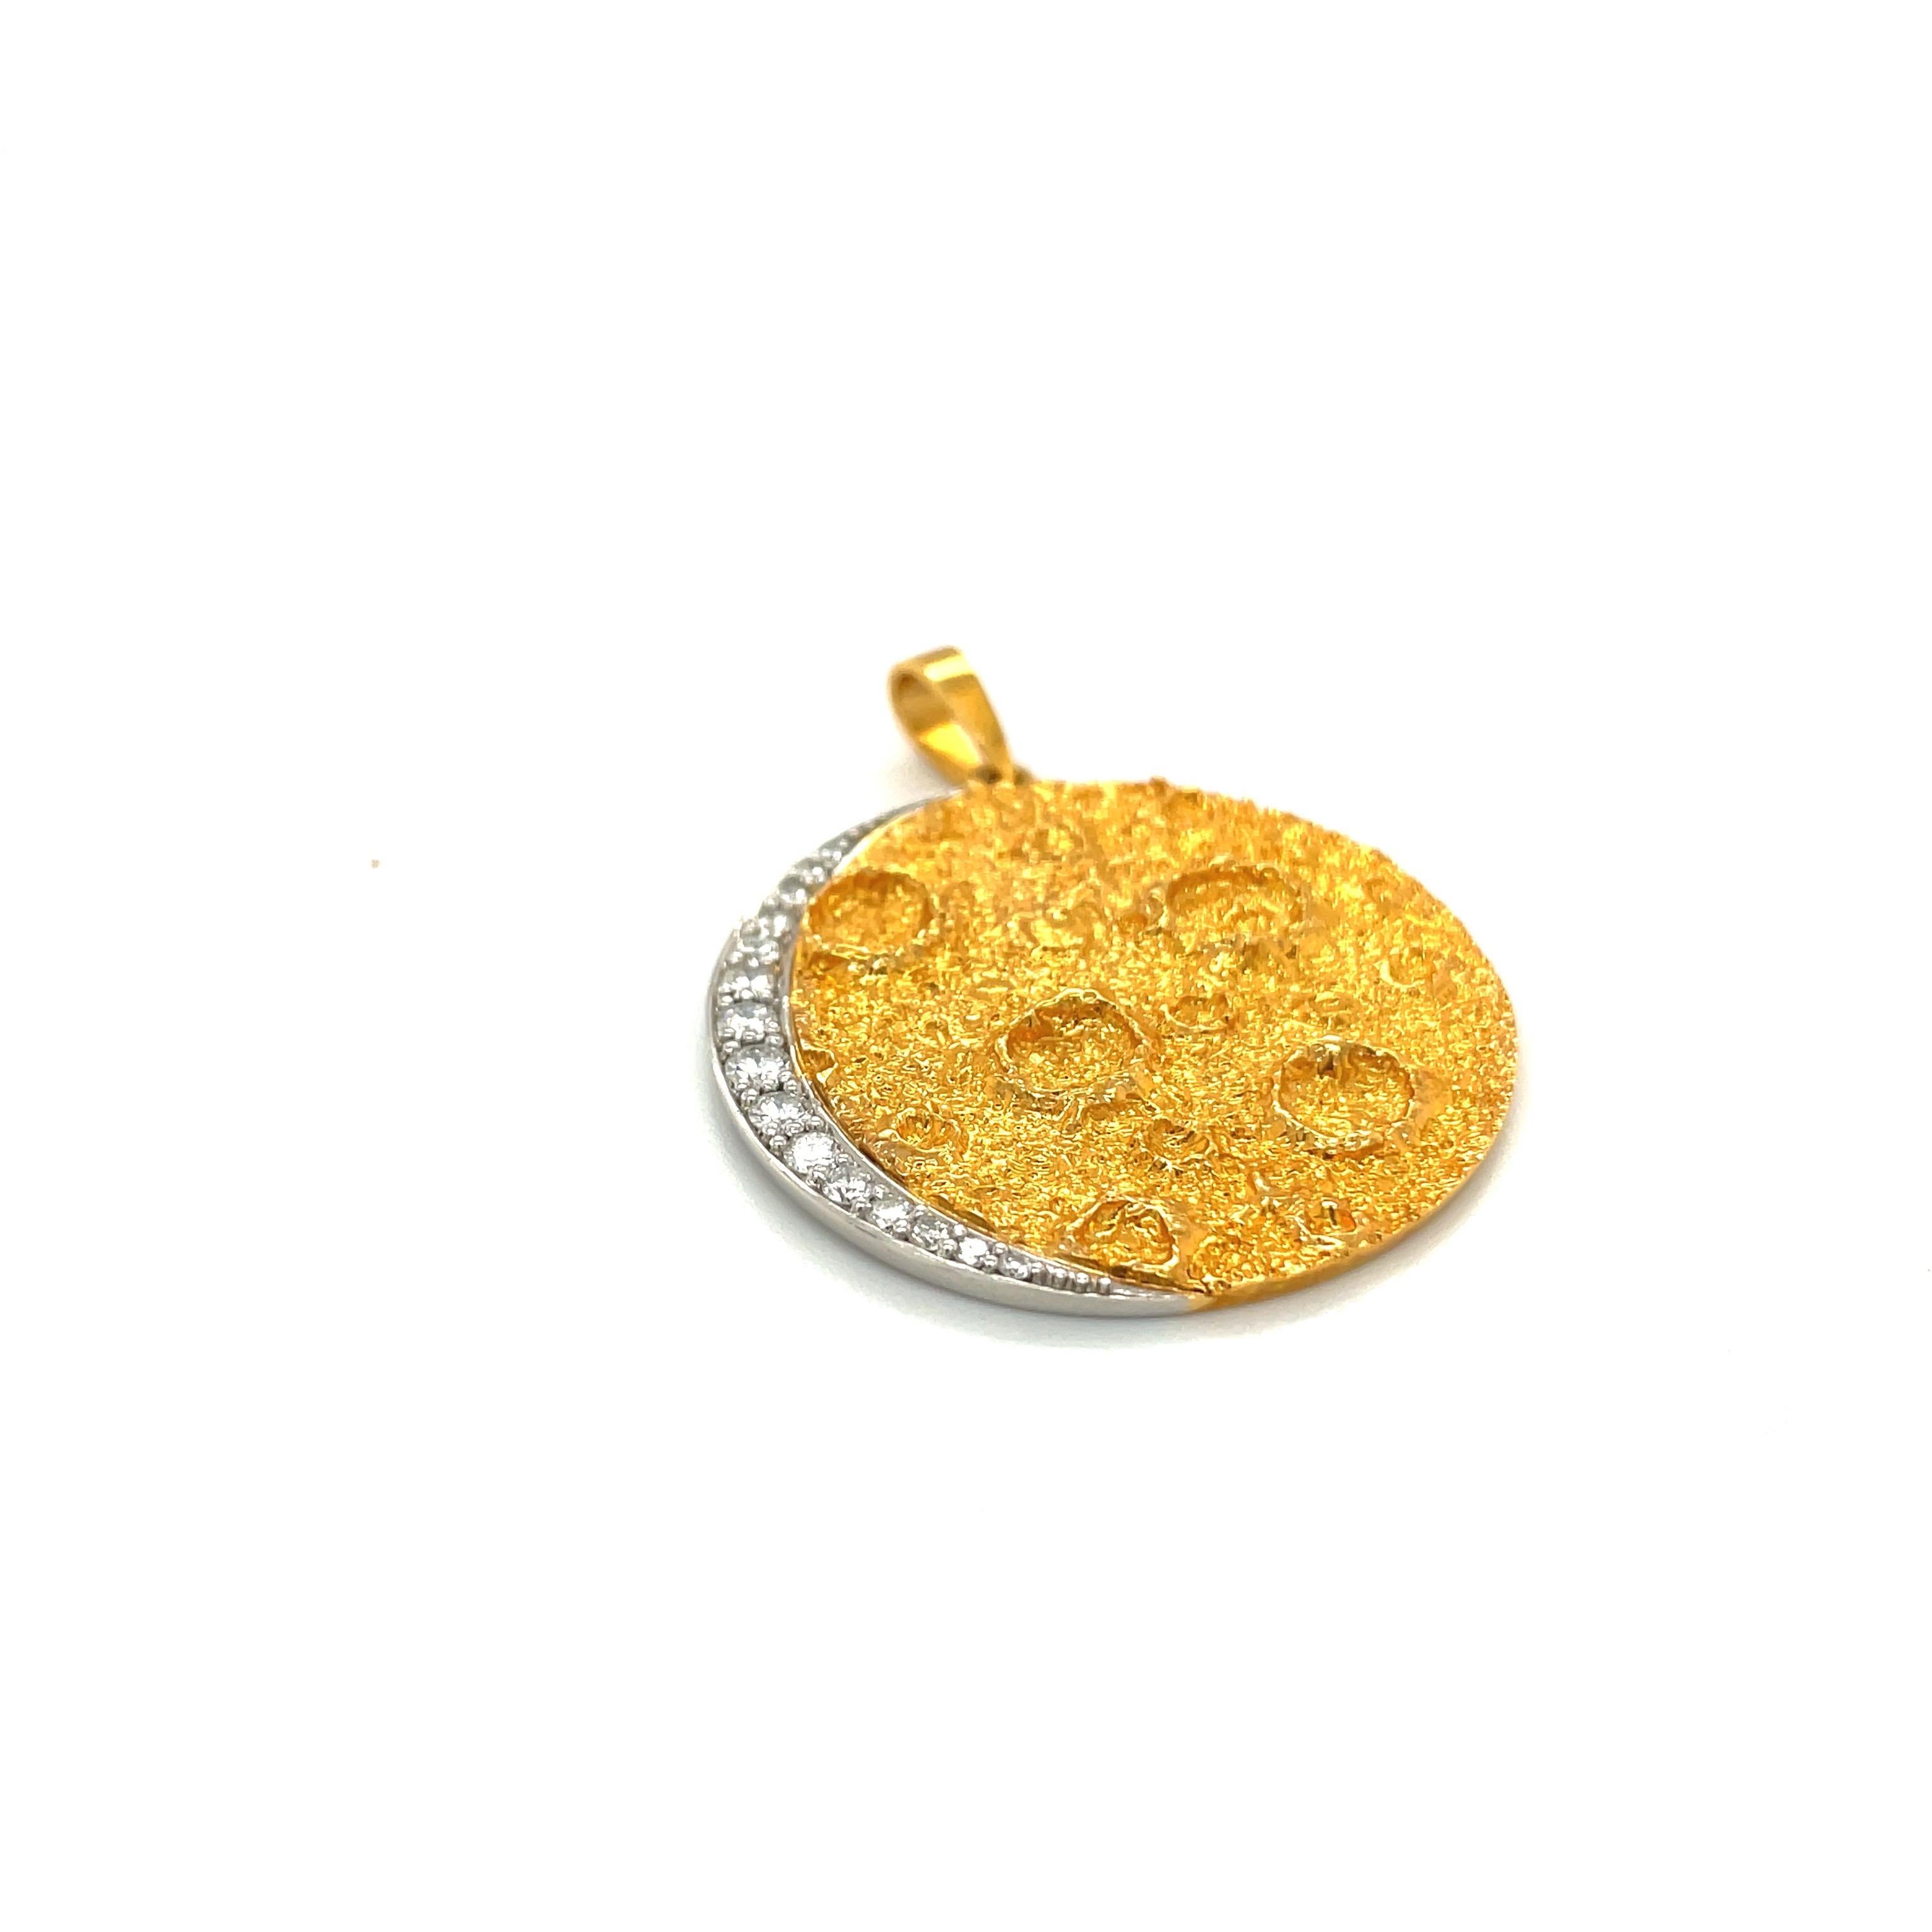 Thia 18 karat yellow gold pendant is crafted in a sand blasted finish. The pendant is designed with a texture to give the feel of the moon's craters. A platinum crescent set with 0.45 carats of round brilliant diamonds borders the pendant.
Stamped